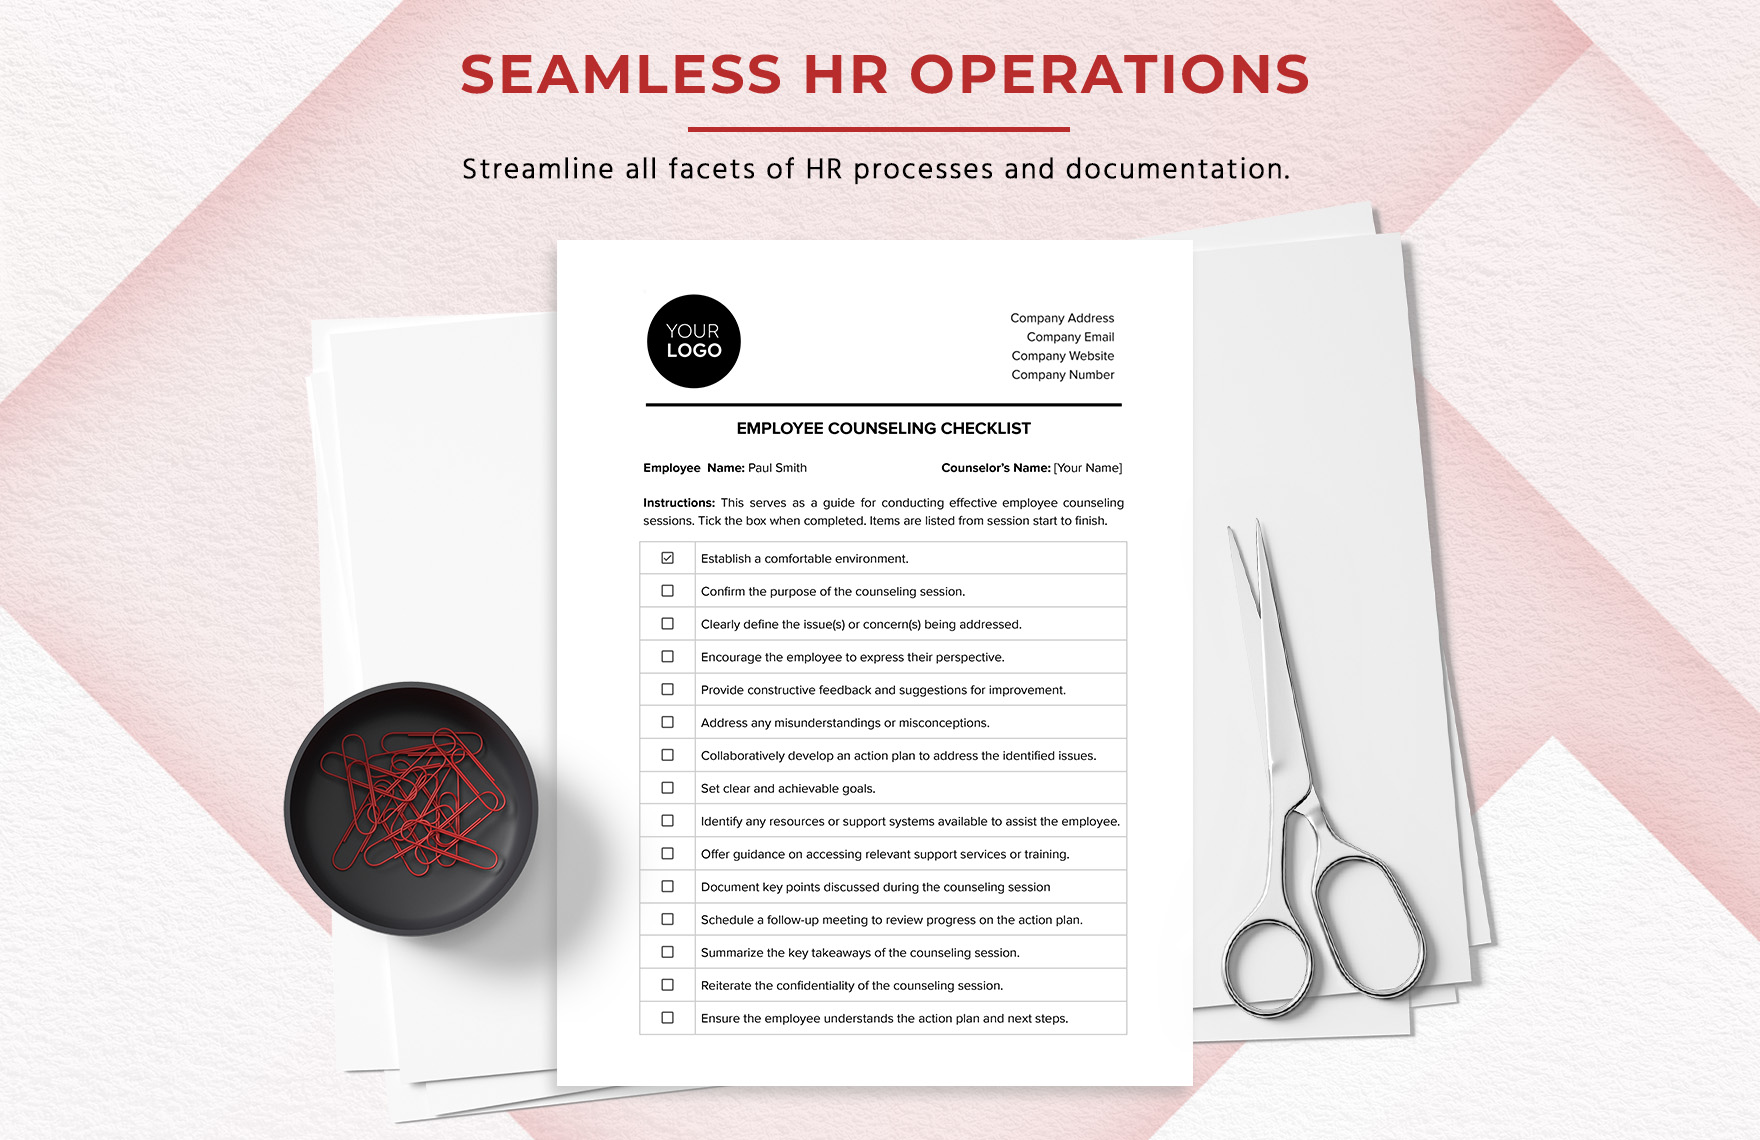 Employee Counseling Checklist HR Template